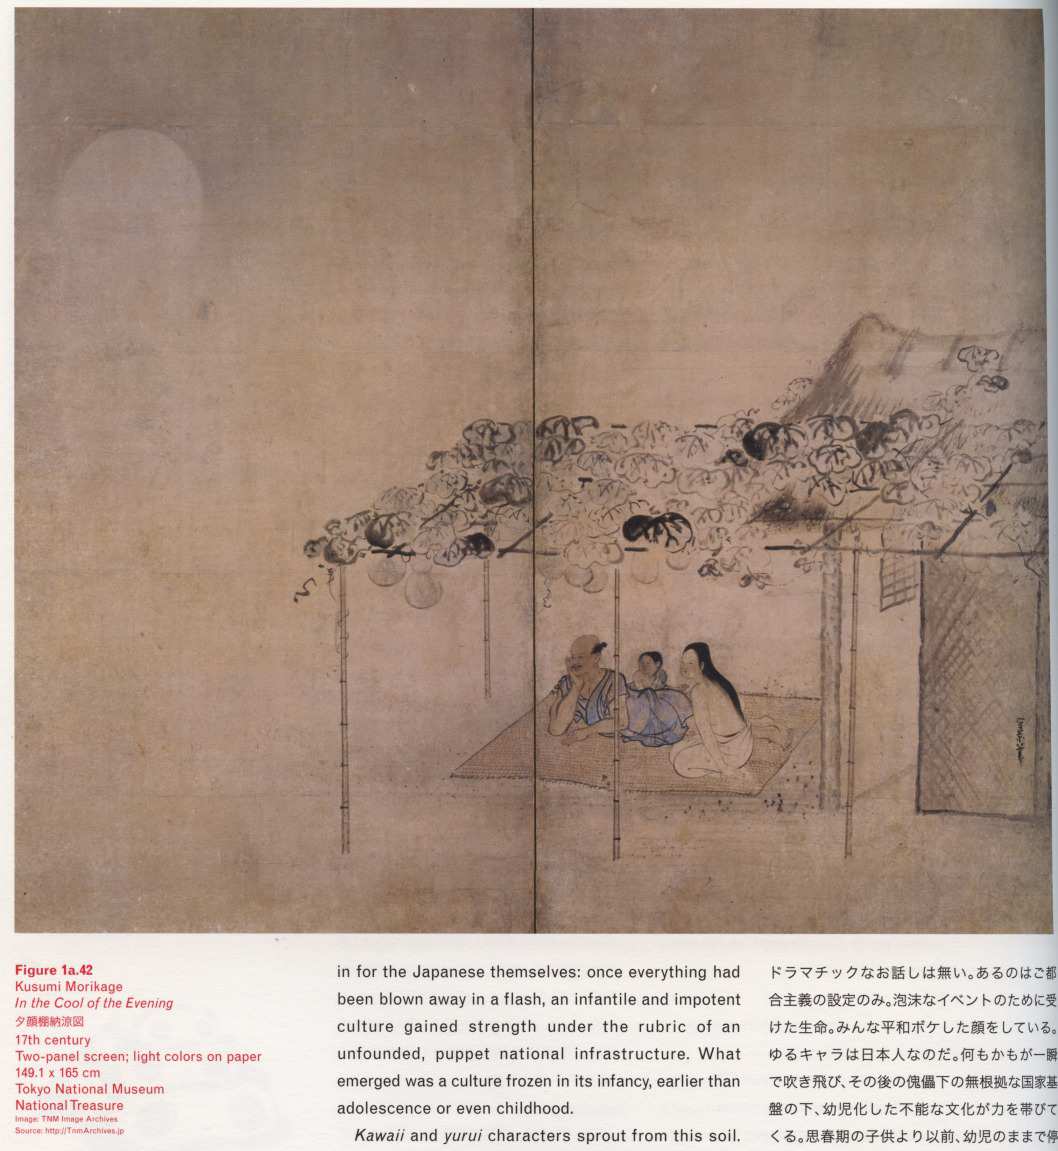 Caption left bottom: · Figure 1a.42 · Kusumi Morikage · In the Cool of the Evening · 17th century · Two-panel screen; light colors on paper · 149.1 × 165 cm · Tokyo National Museum · National Treasure